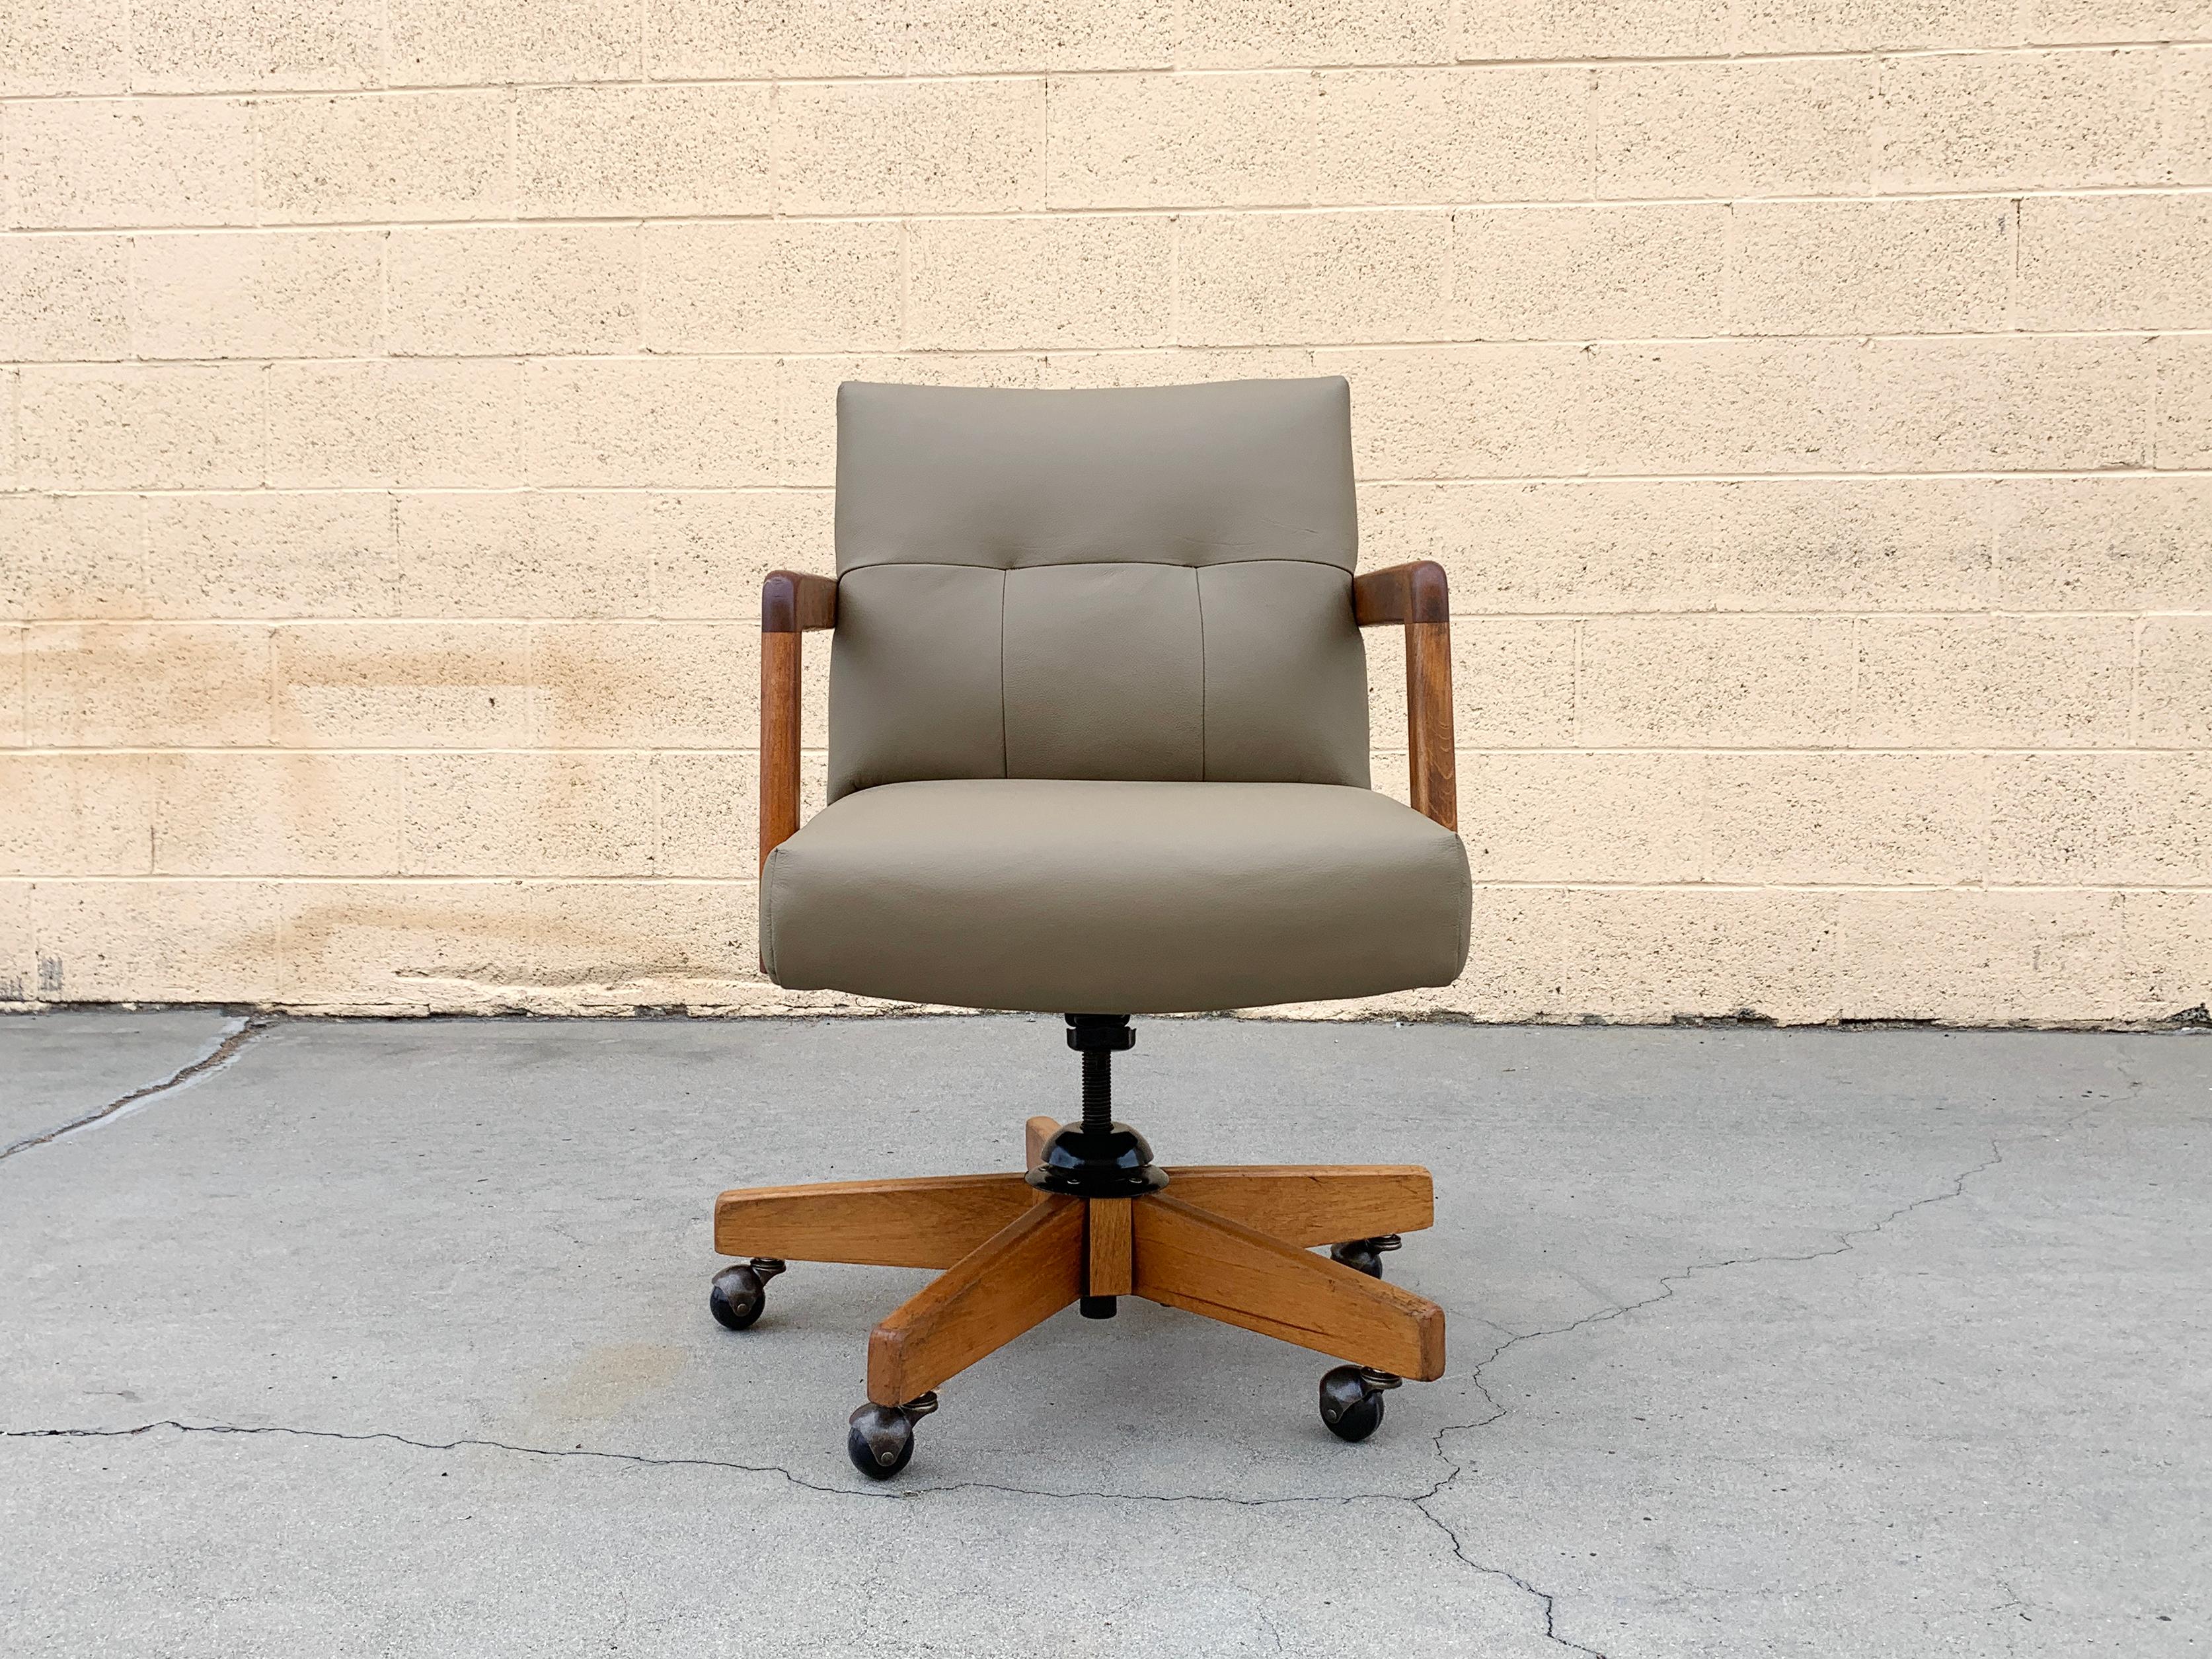 Handsome 1970s office chair by Gordon Manufacturing Co. Newly reupholstered seat in quality grey leather; reconditioned oak frame and base. Swivels and tilts. In excellent vintage condition. 

Dimensions: 
Base– 26